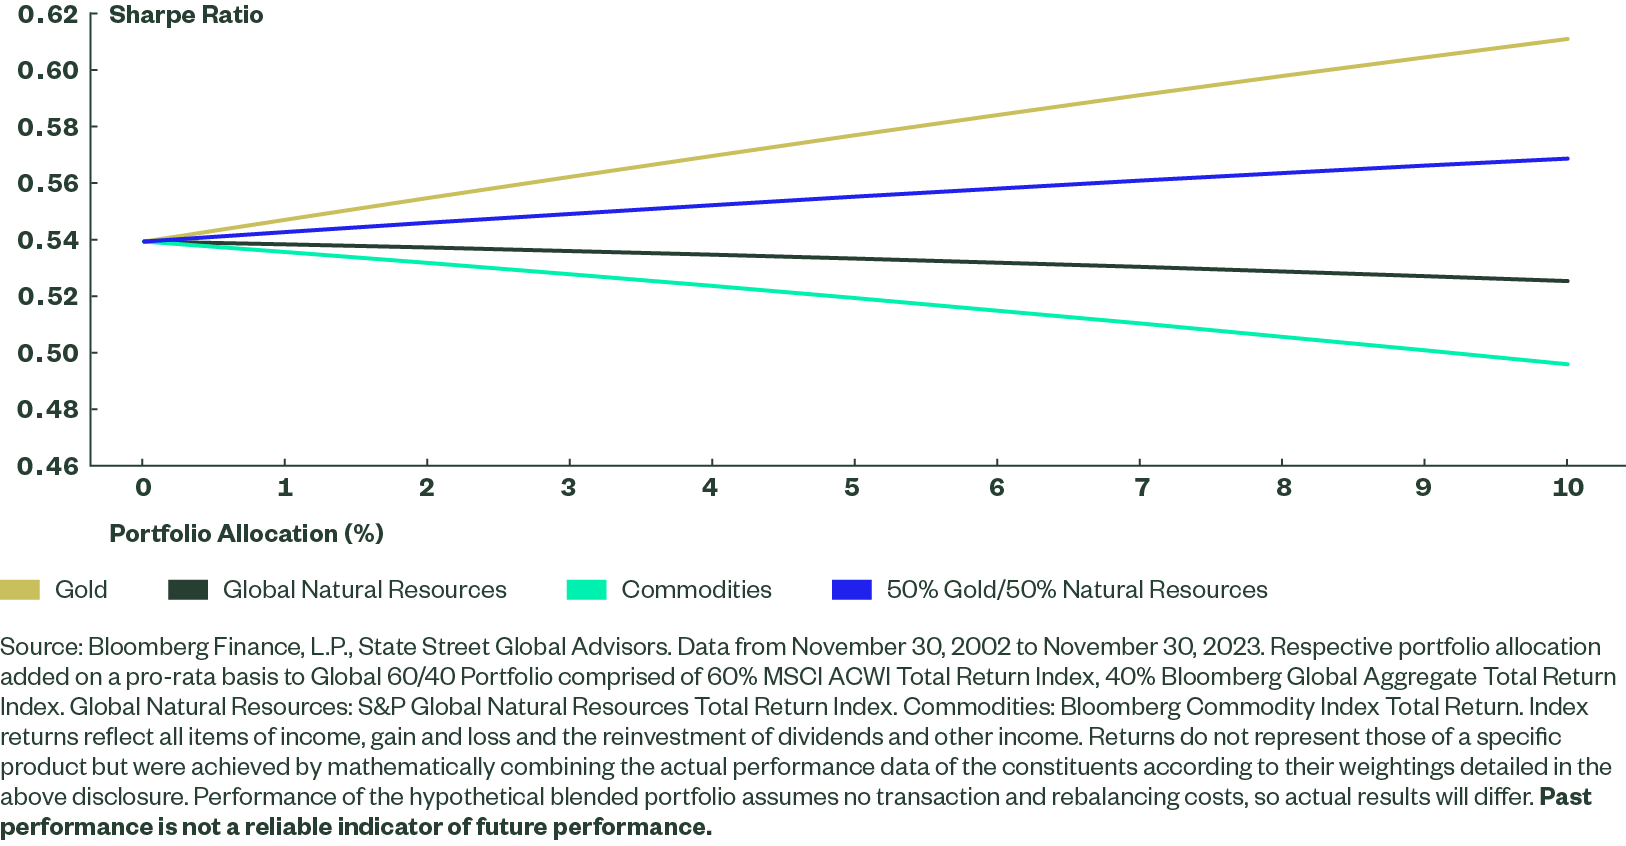 Figure 12: Combining Gold With Natural Resources Provides an Improved Sharpe Ratio With Inflation Protection 